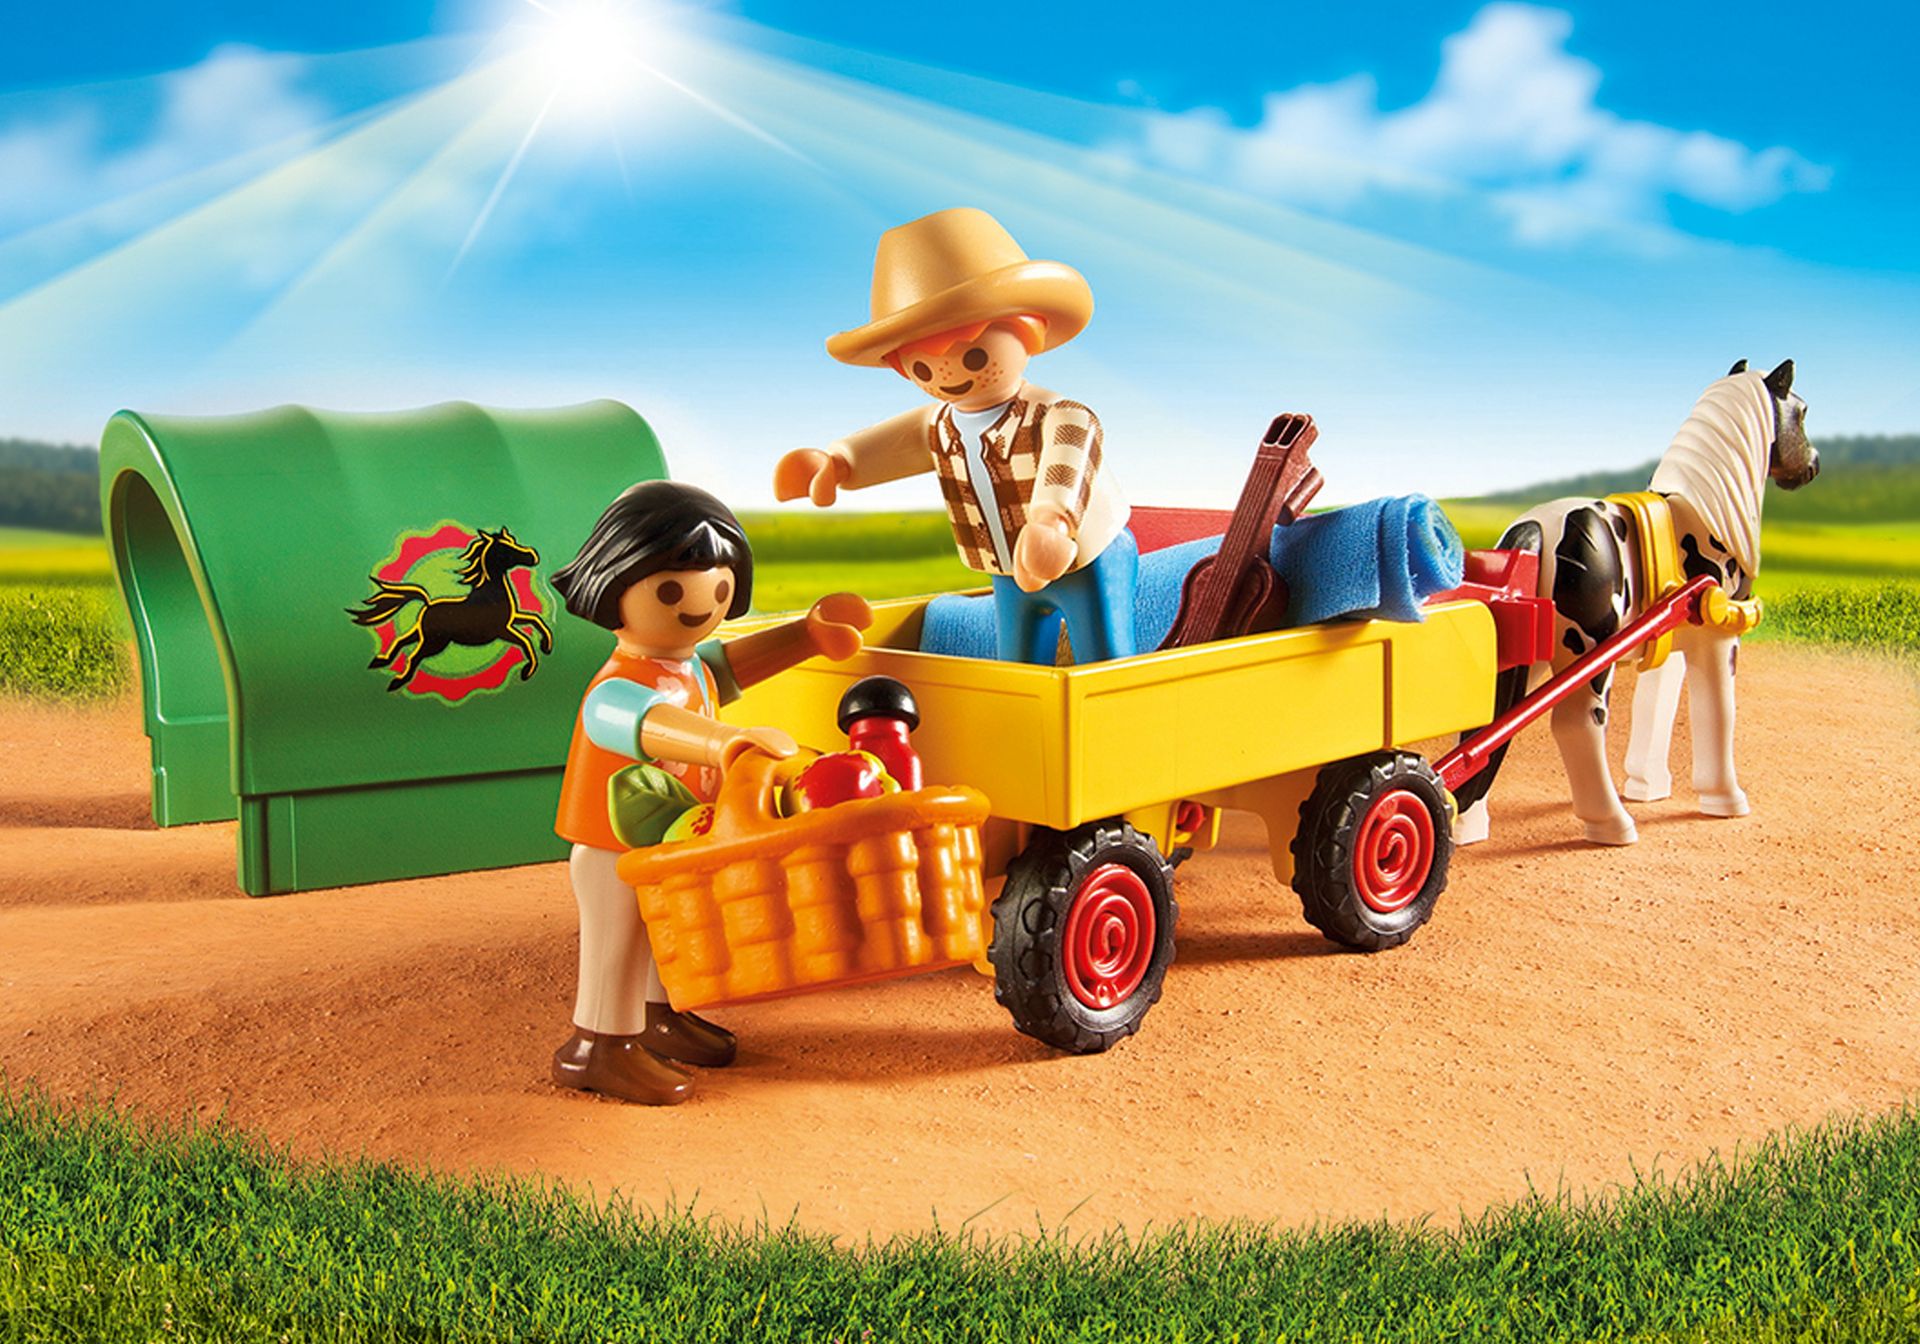 PLAYMOBIL 5686 Picnic With Pony Wagon for sale online 